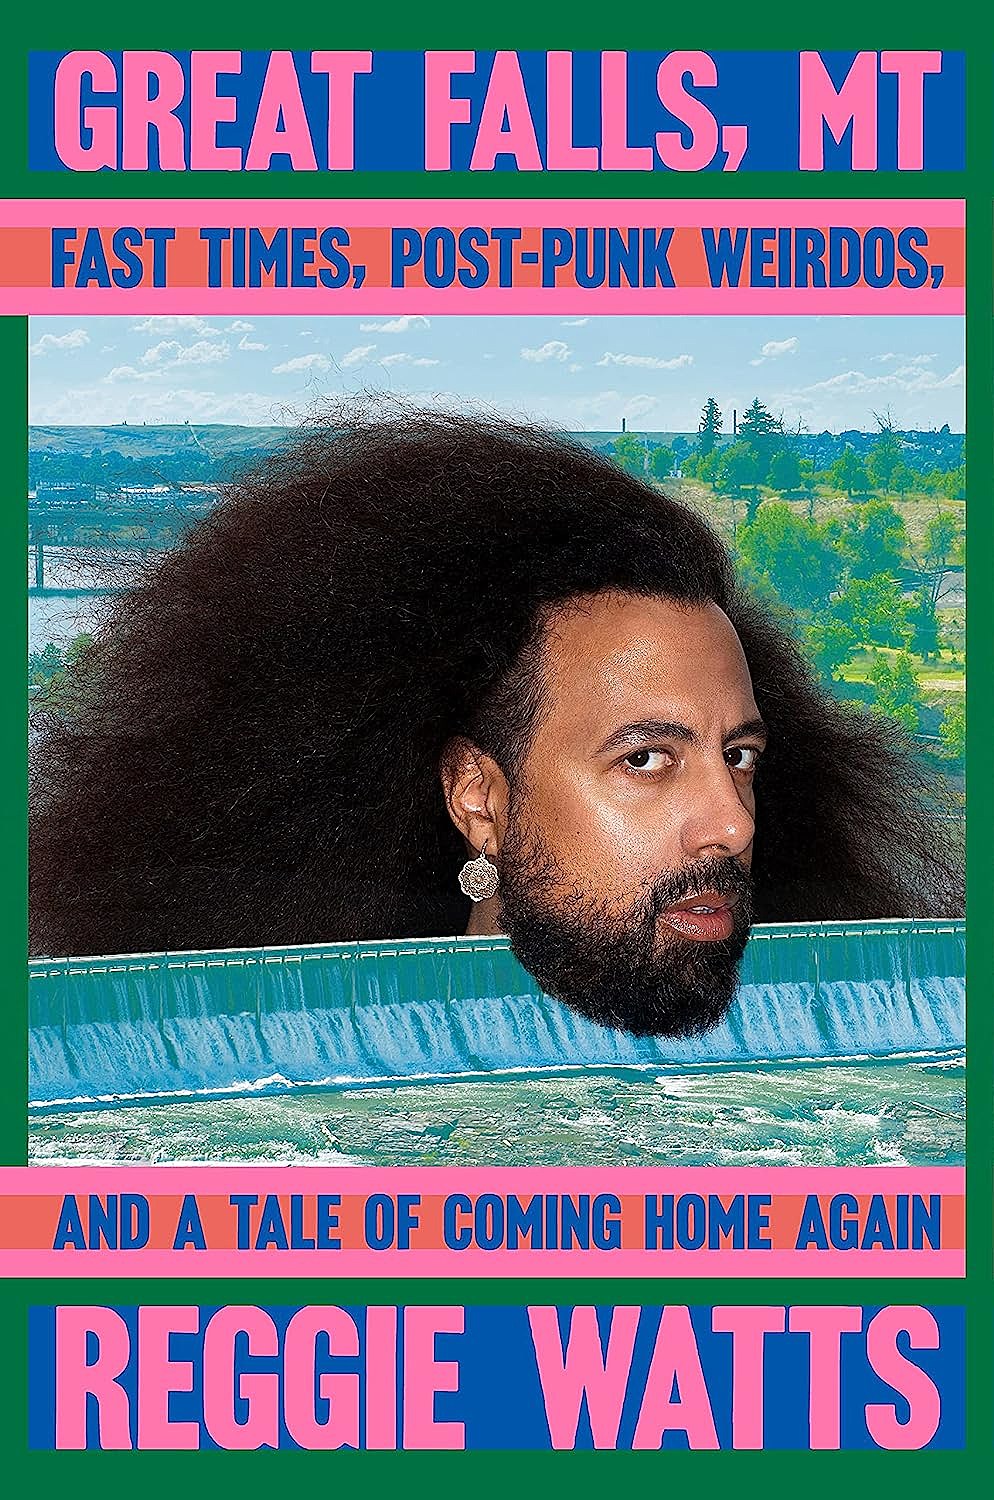 Reggie Watts, <em><a class="external" href="https://bookshop.org/a/132/9780593472460" target="_blank" rel="noopener">Great Falls, MT: Fast Times, Post-Punk Weirdos, and a Tale of Coming Home Again</a></em>; cover design by TK TK (Tiny Reparations Press, October 17) 